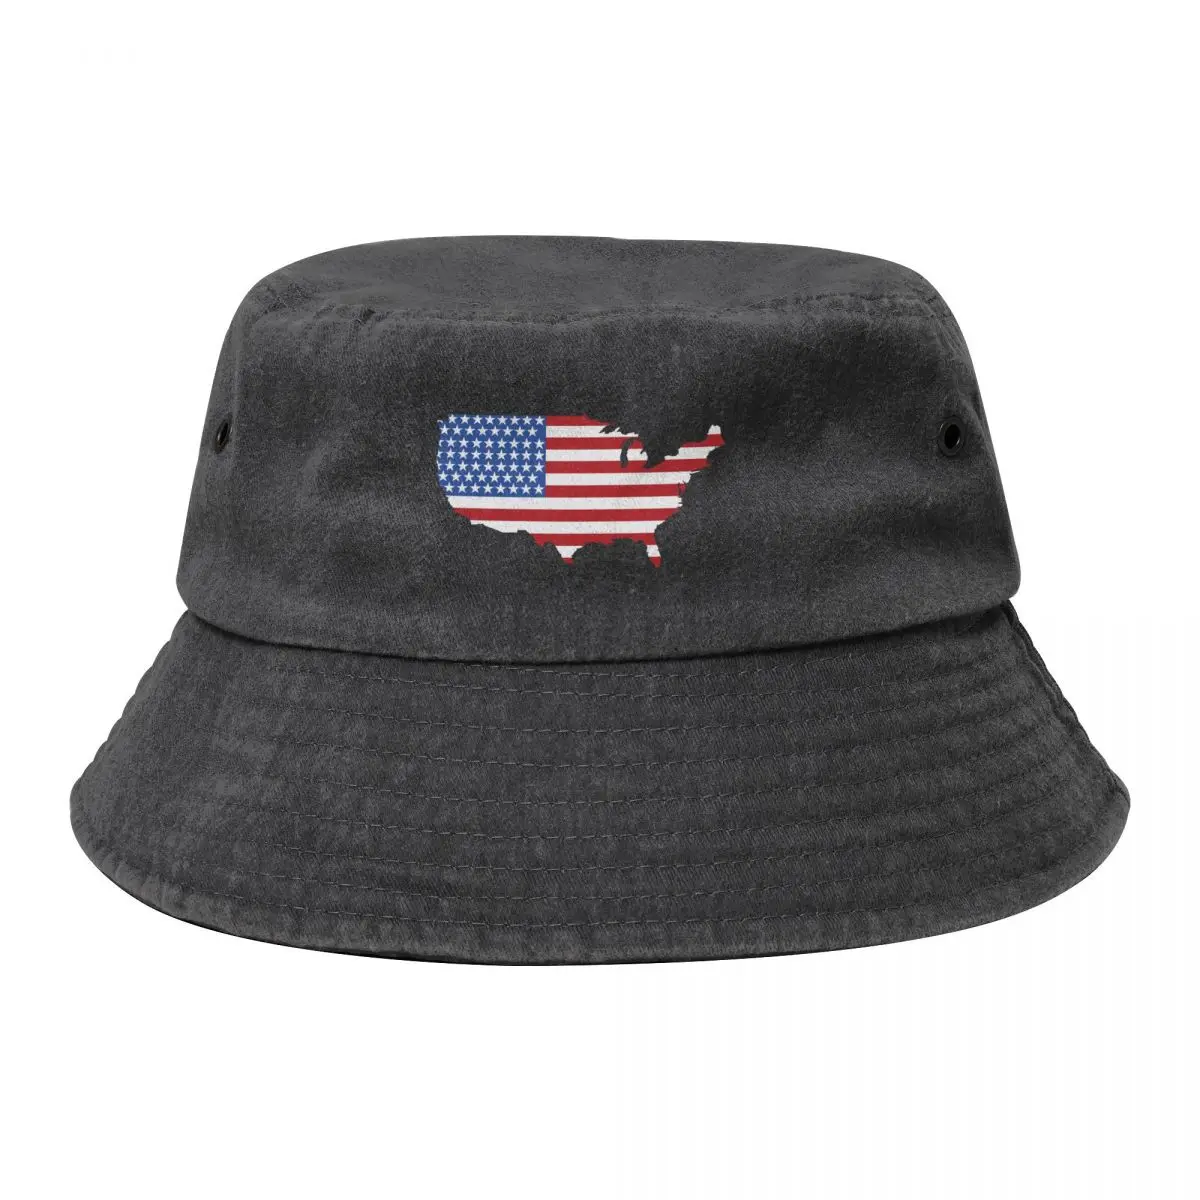 

United States (USA) Bucket Hat Military Tactical Cap Rugby Hat Man Luxury Mens Tennis Women's